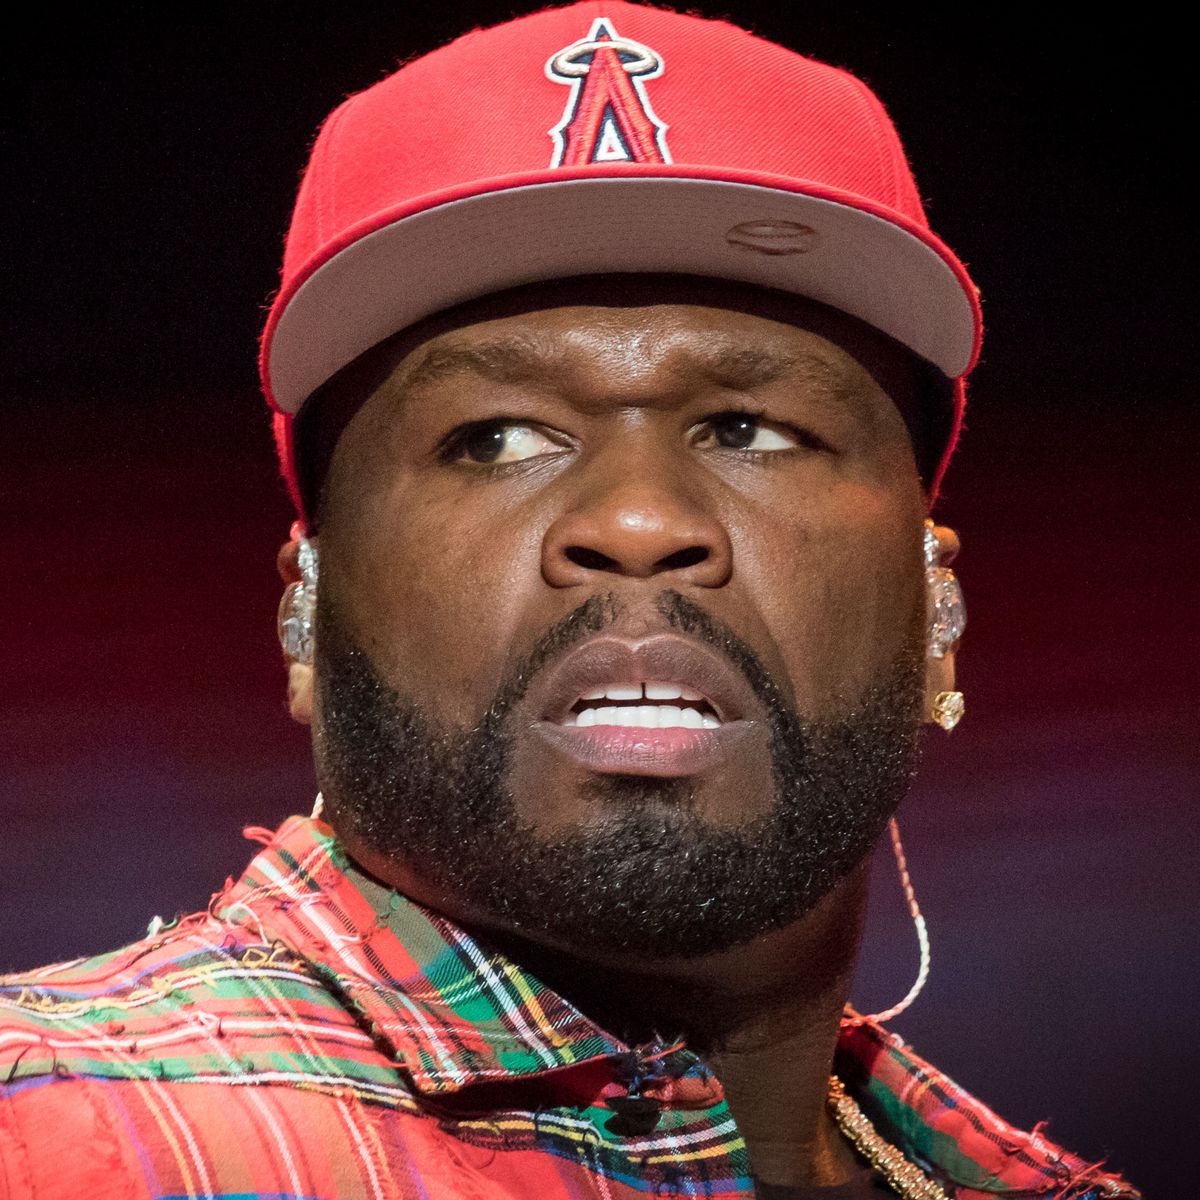 50 cent was only shot 5 times